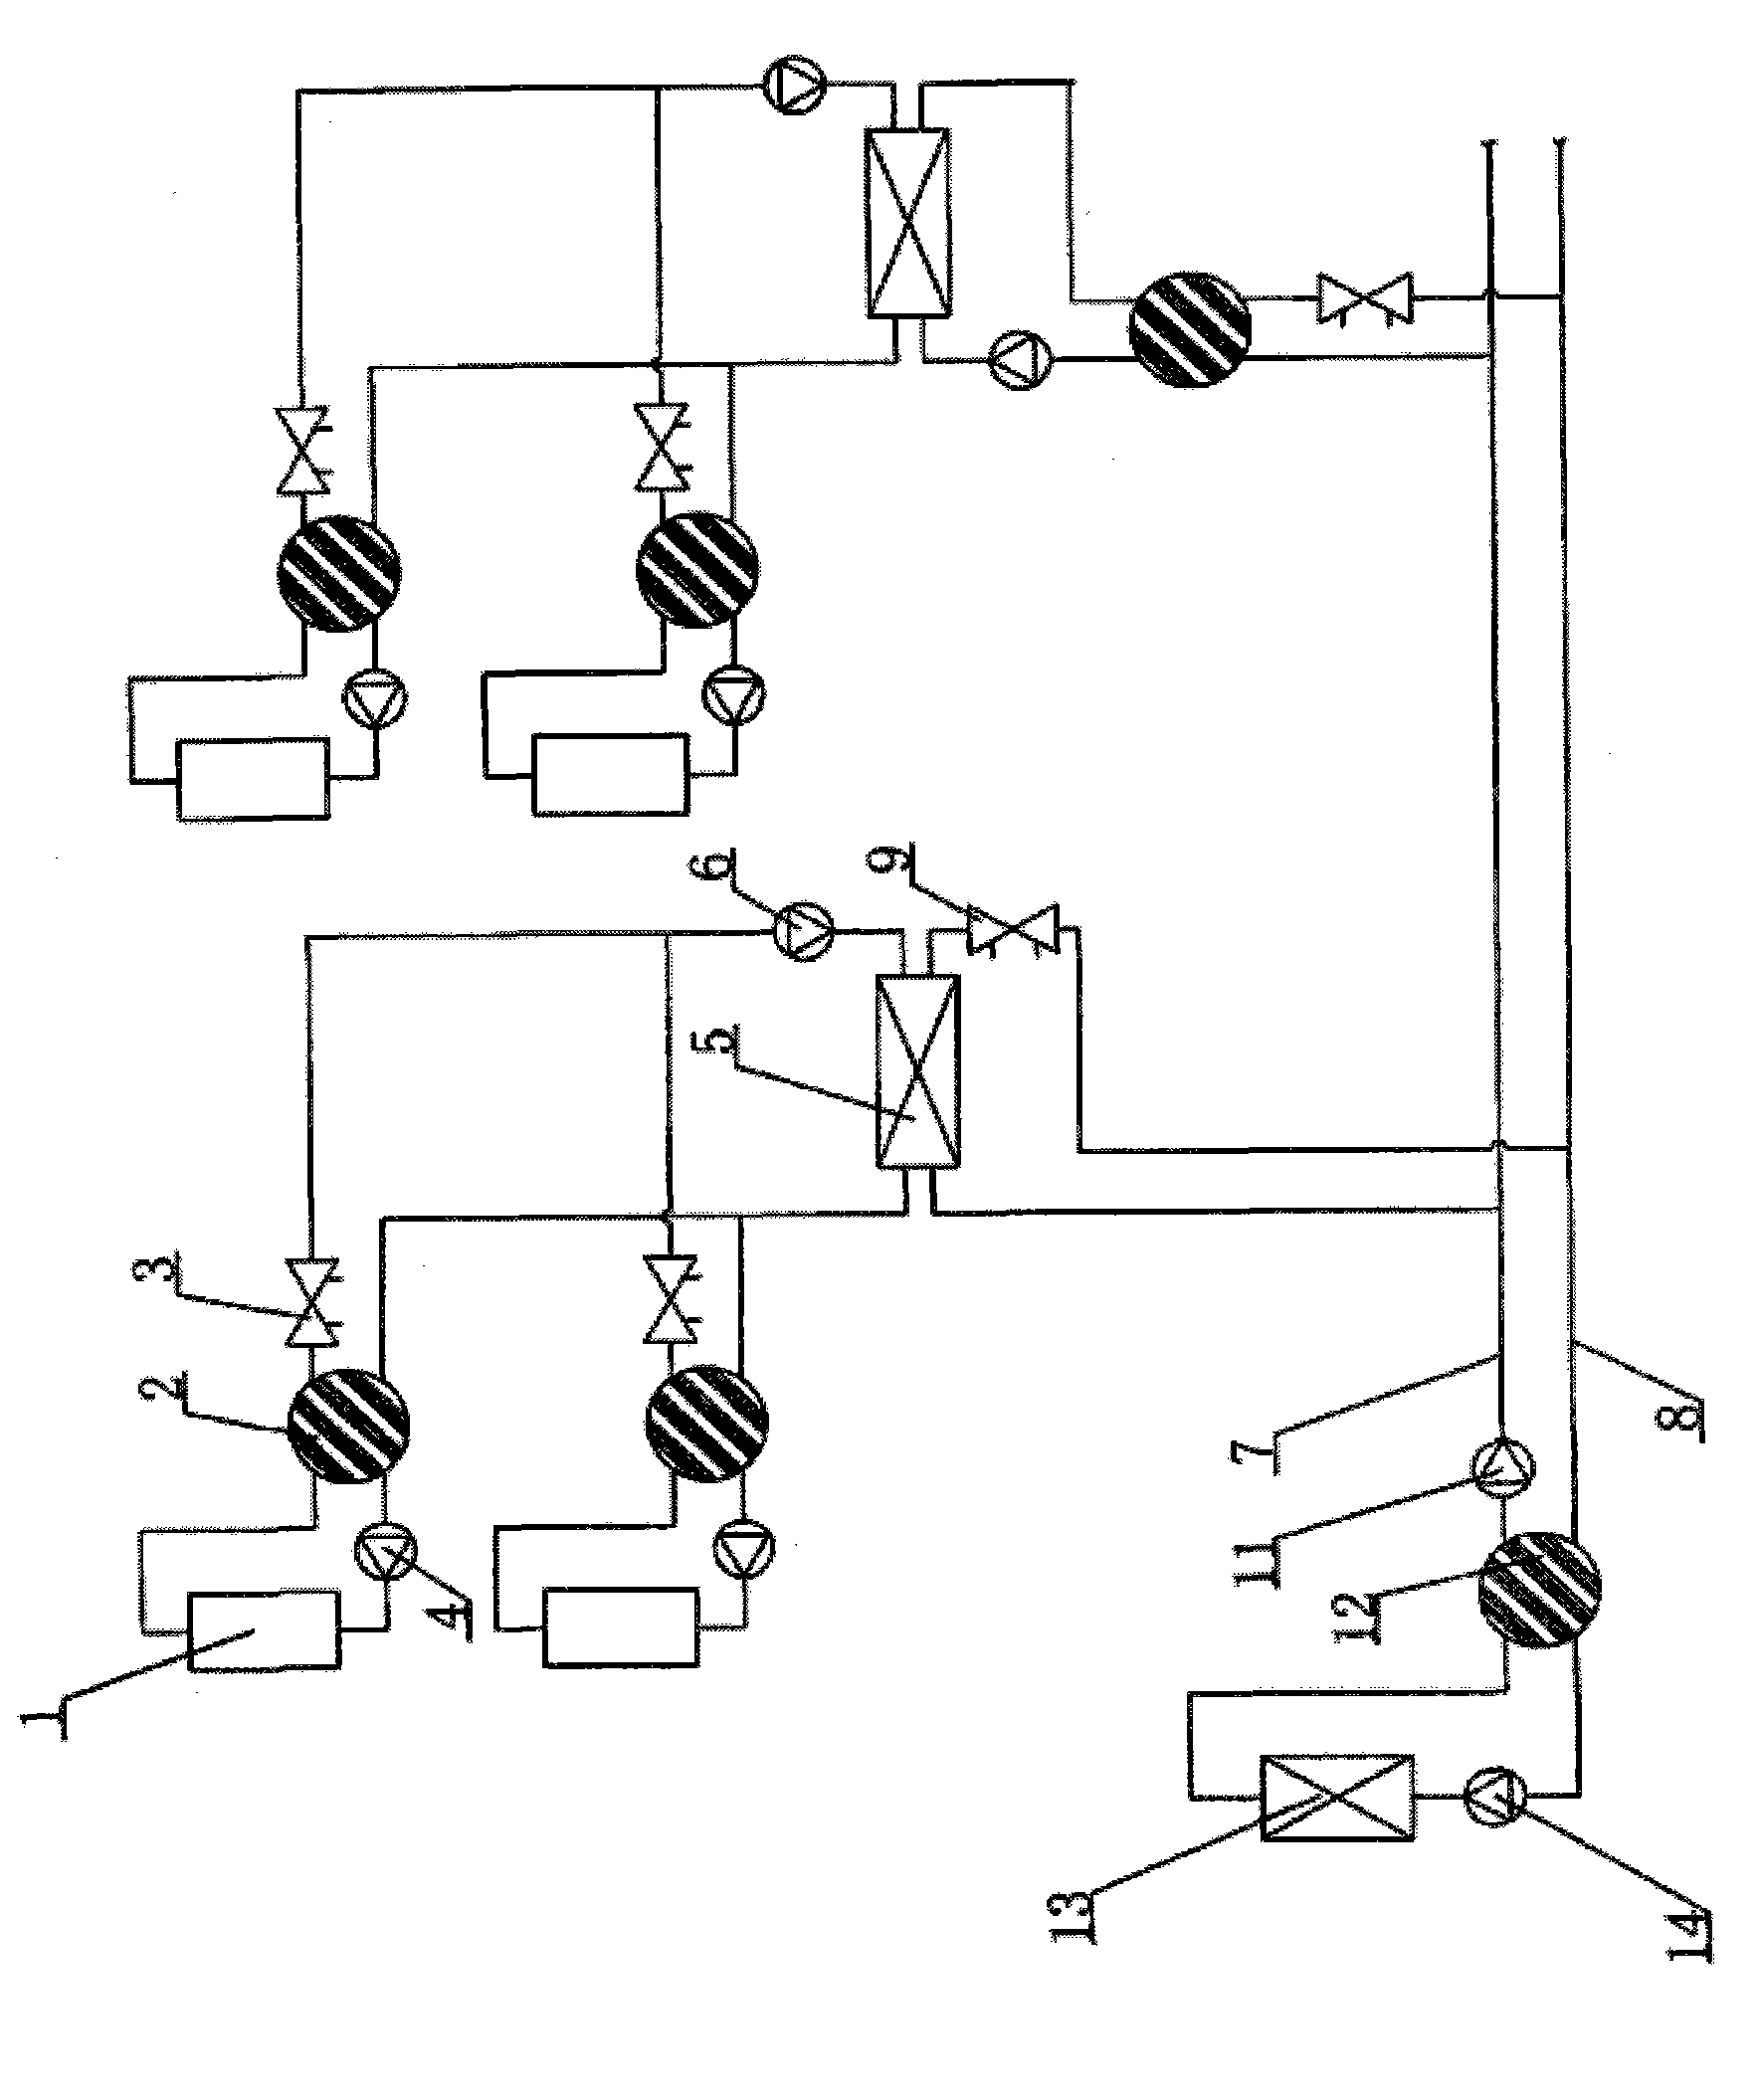 Heating system based on hot water